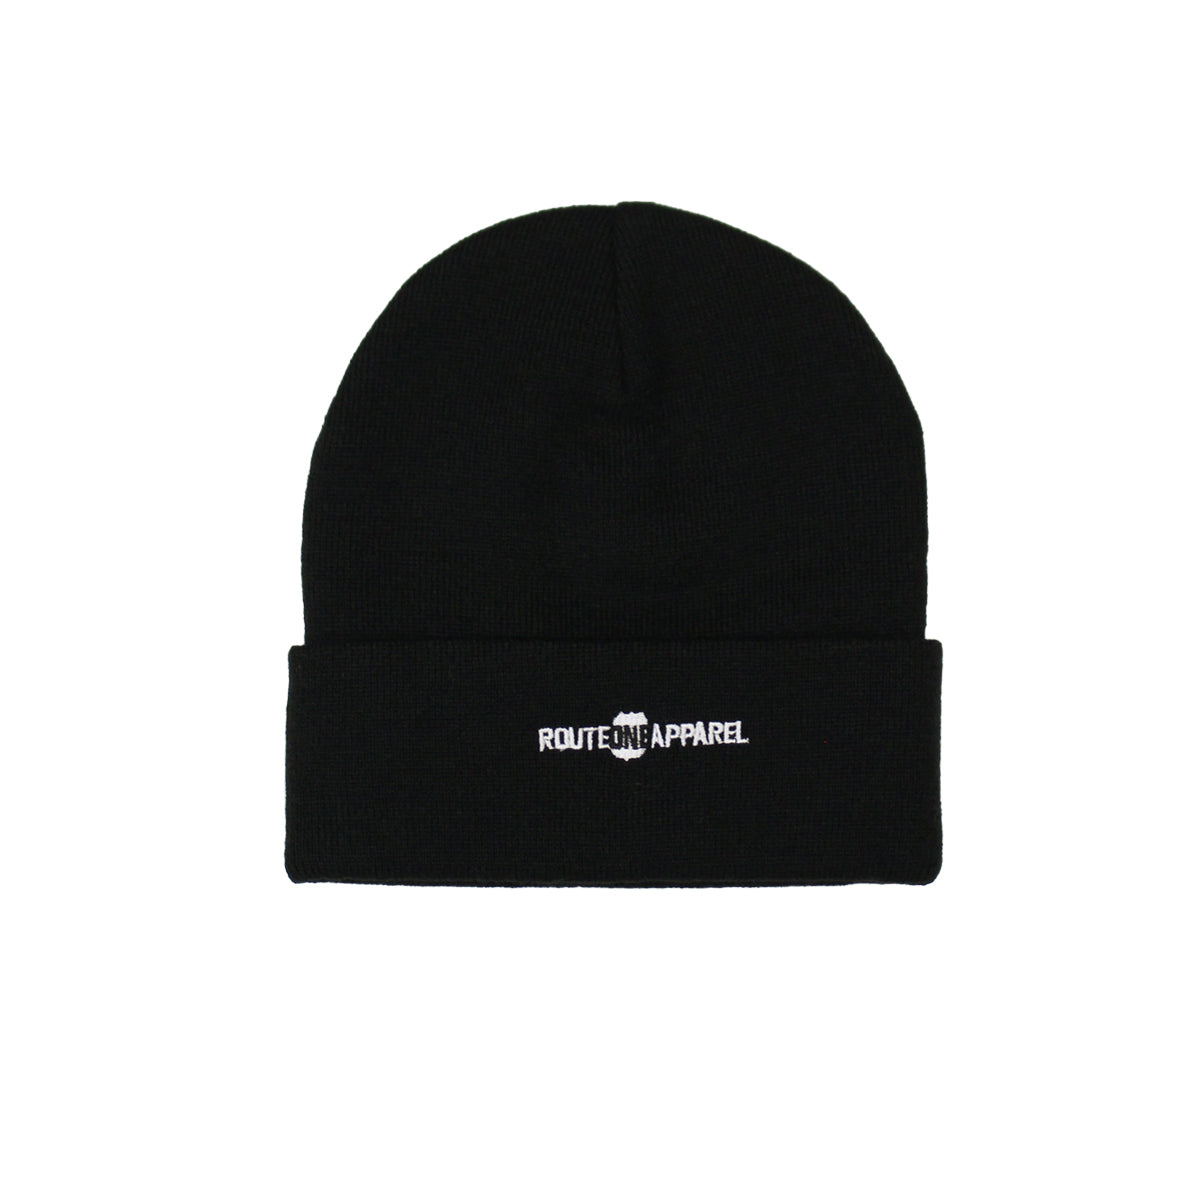 I Love Where I'm From (Black) / Slouchy Knit Beanie Cap - Route One Apparel